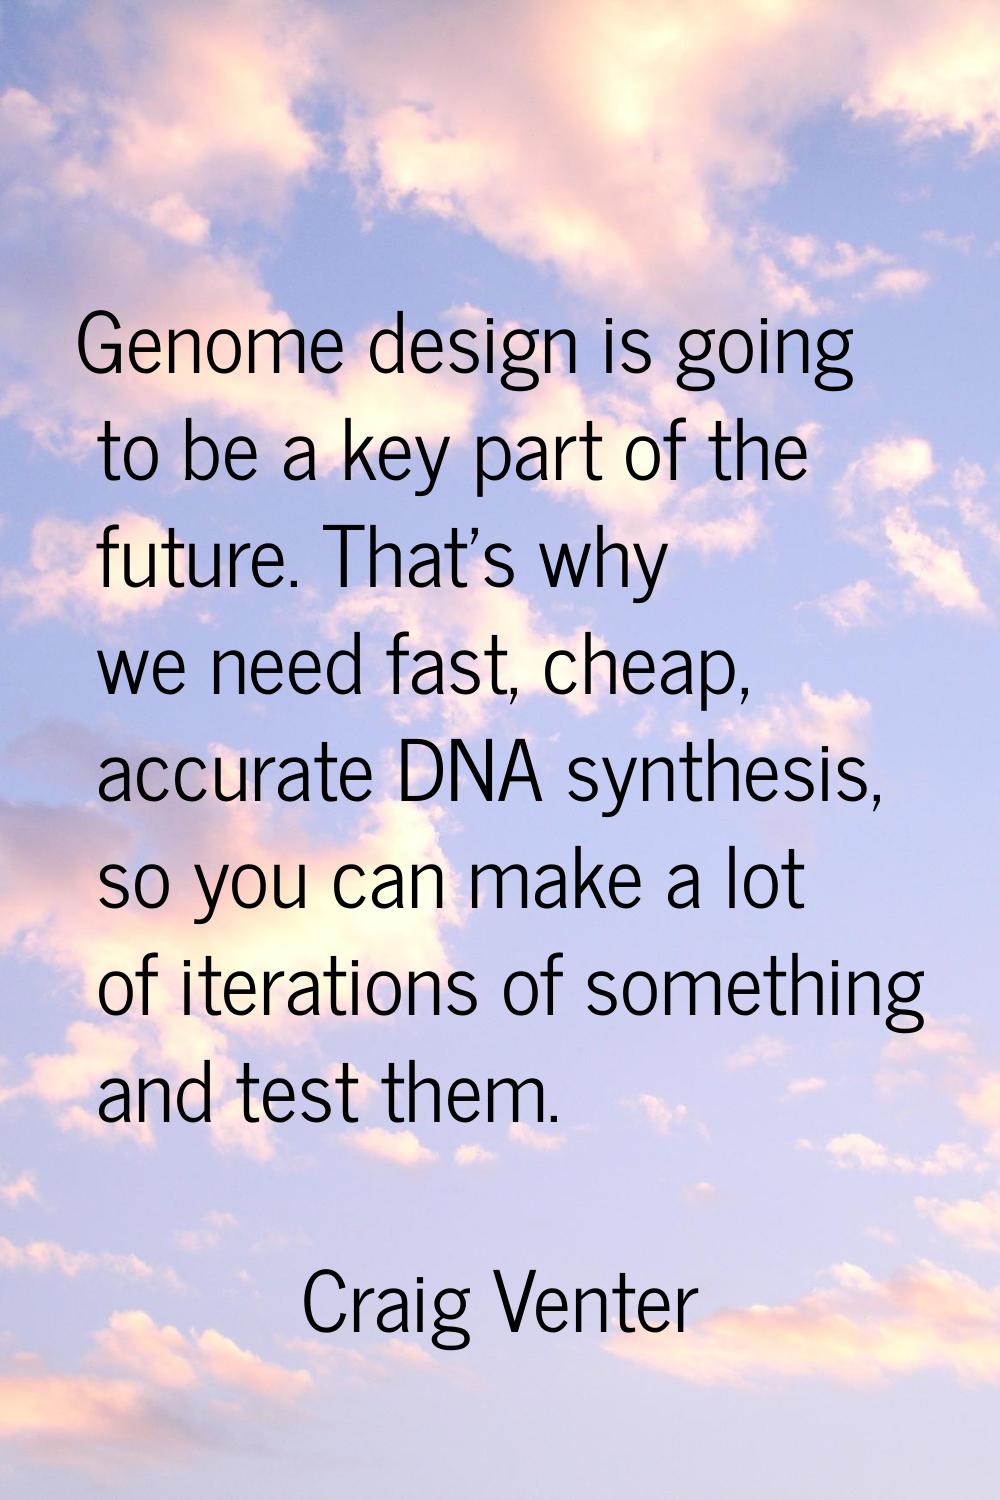 Genome design is going to be a key part of the future. That's why we need fast, cheap, accurate DNA